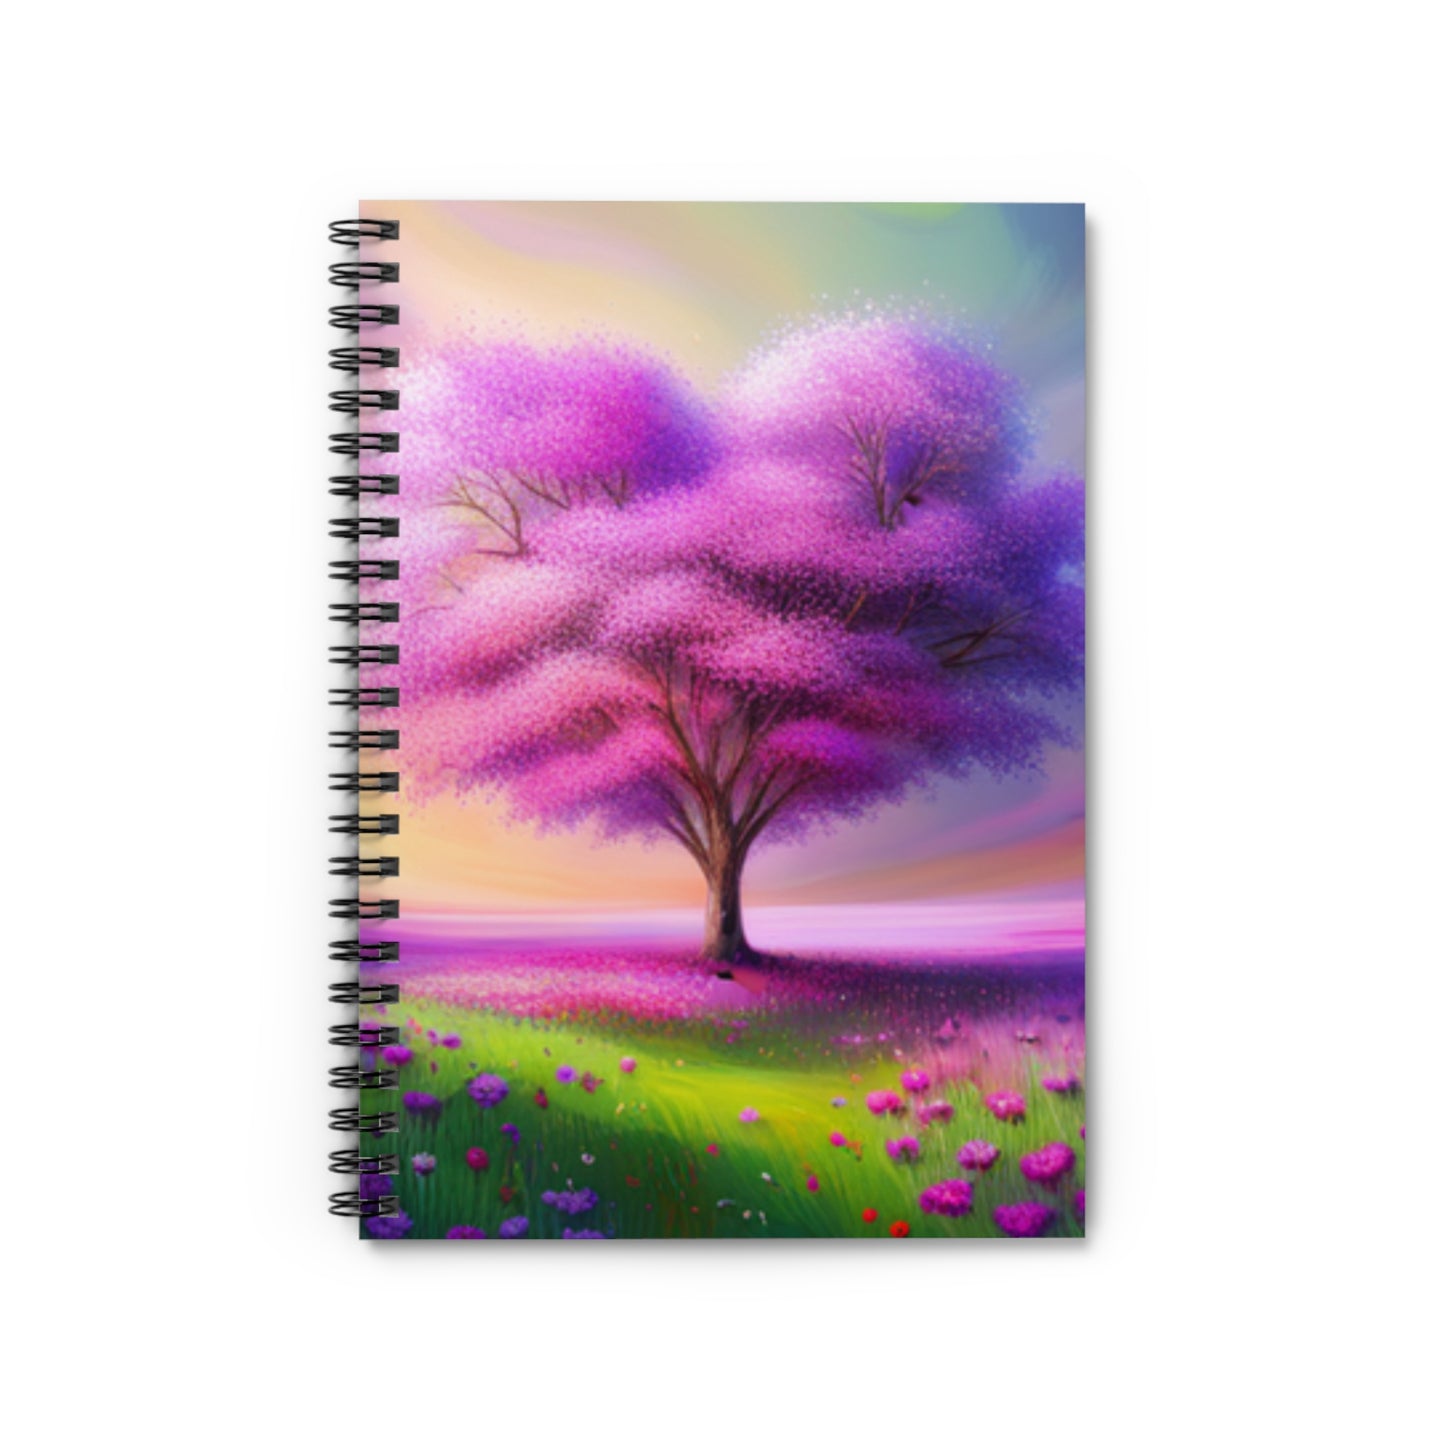 Notebook - Pink Heart Tree in a Field of Flowers Spiral Notebook - Ruled Line